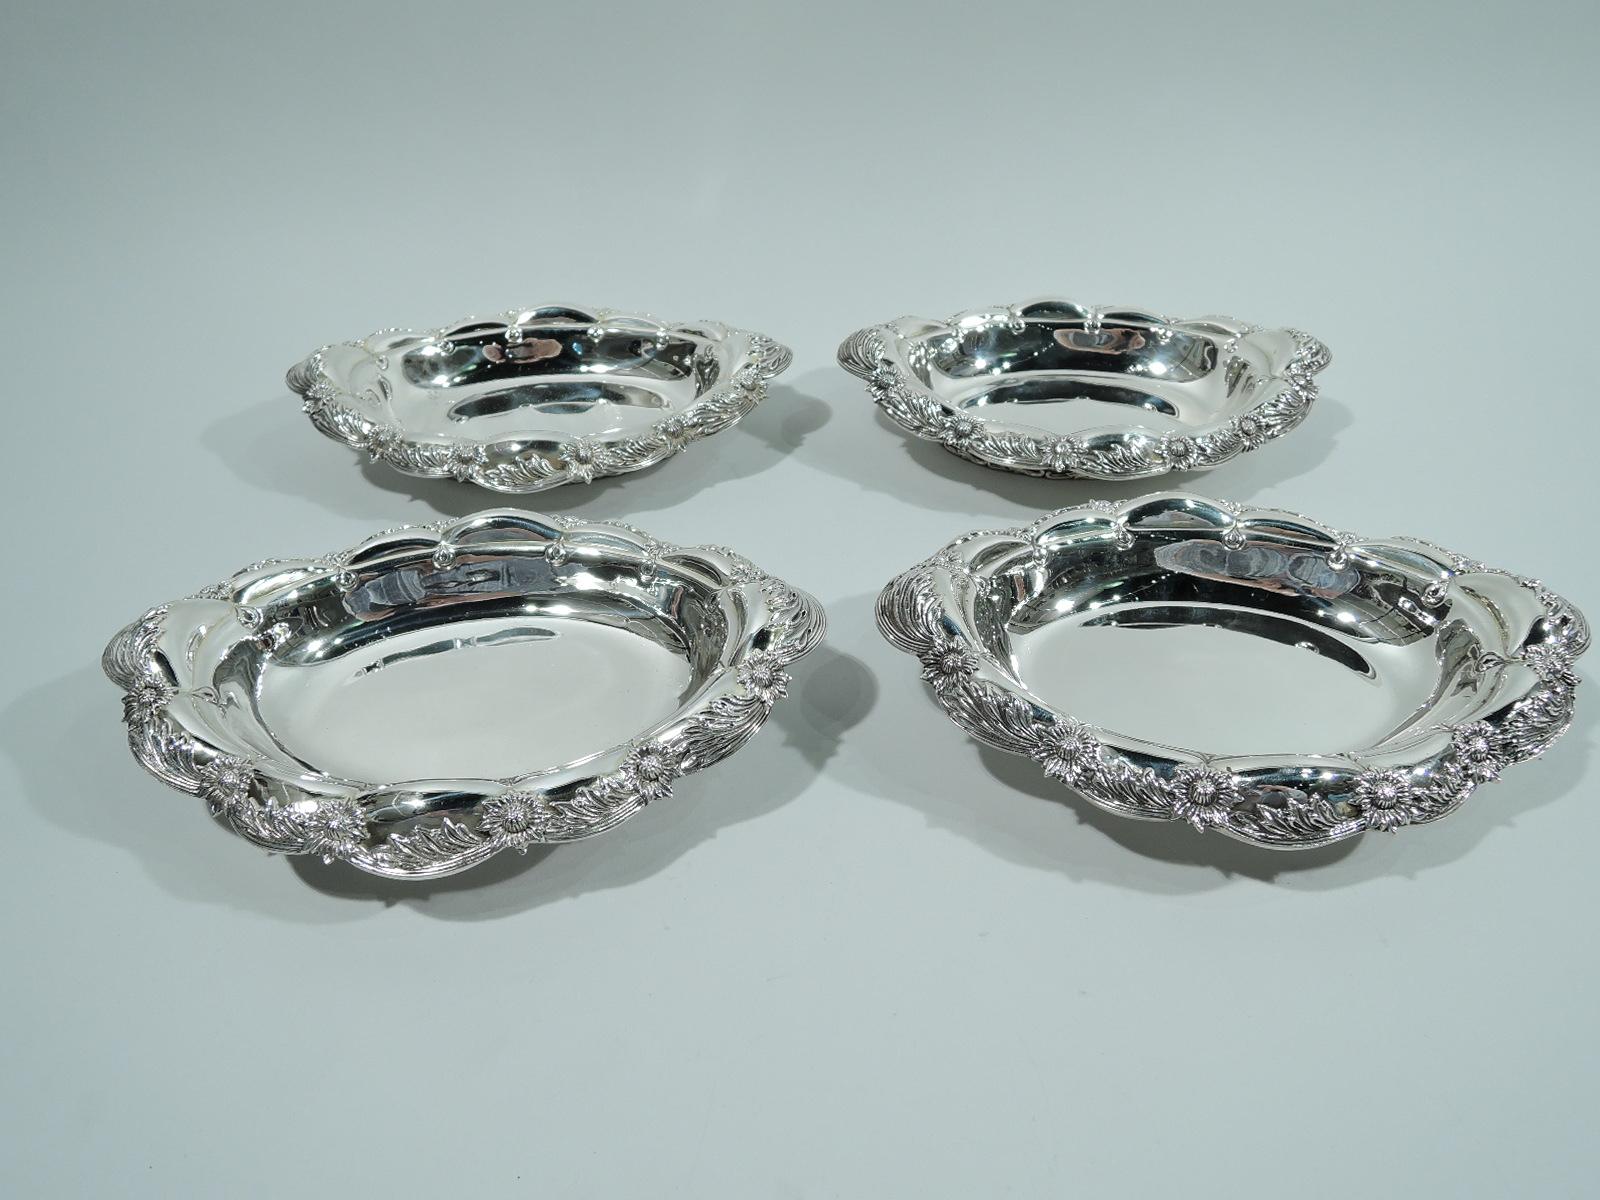 Two pairs of Chrysanthemum sterling silver serving bowls. Made by Tiffany & Co. in New York. Each: Oval well and turned-down petal rim in alternating leaf and flower head pattern. Short foot with applied scrolls. Restrained and elegant pieces in the